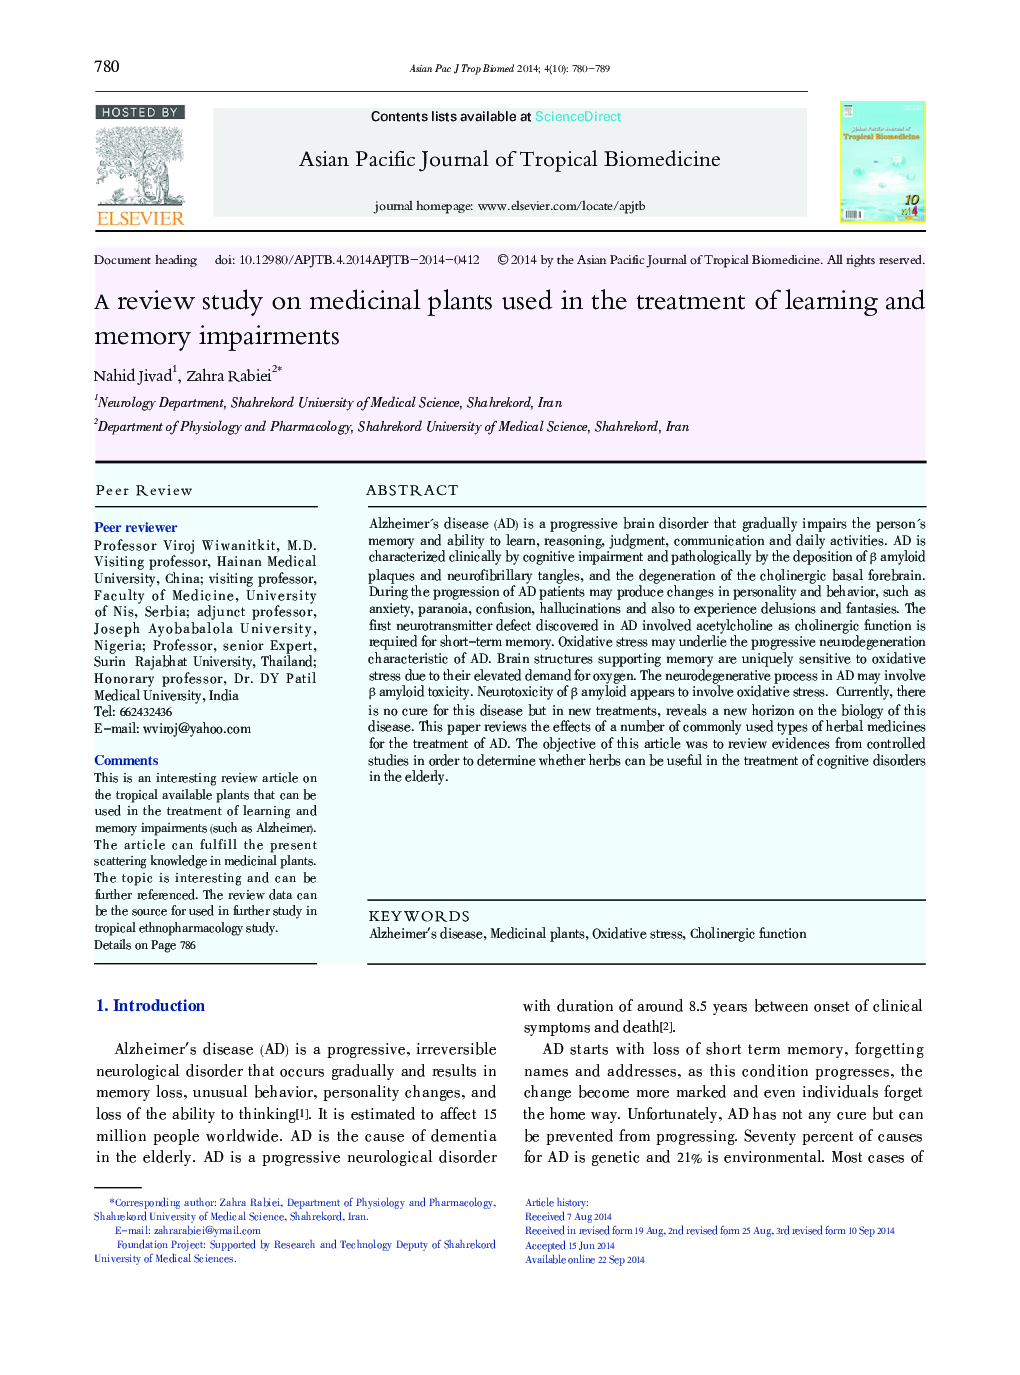 A review study on medicinal plants used in the treatment of learning and memory impairments 